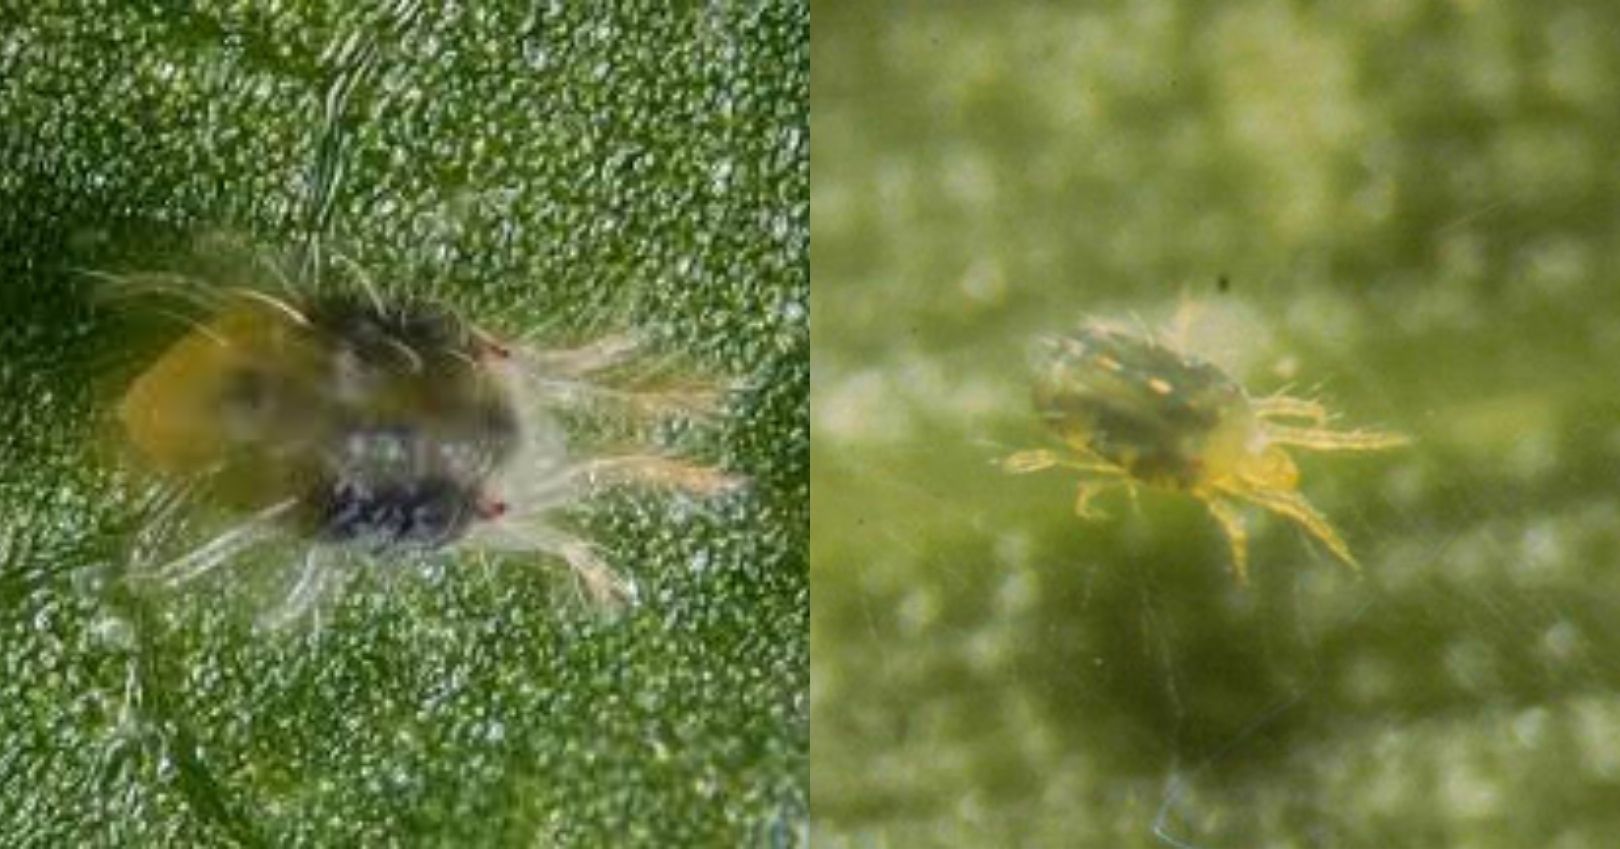 Twospotted Spider Mite and Bank's Grass Mite